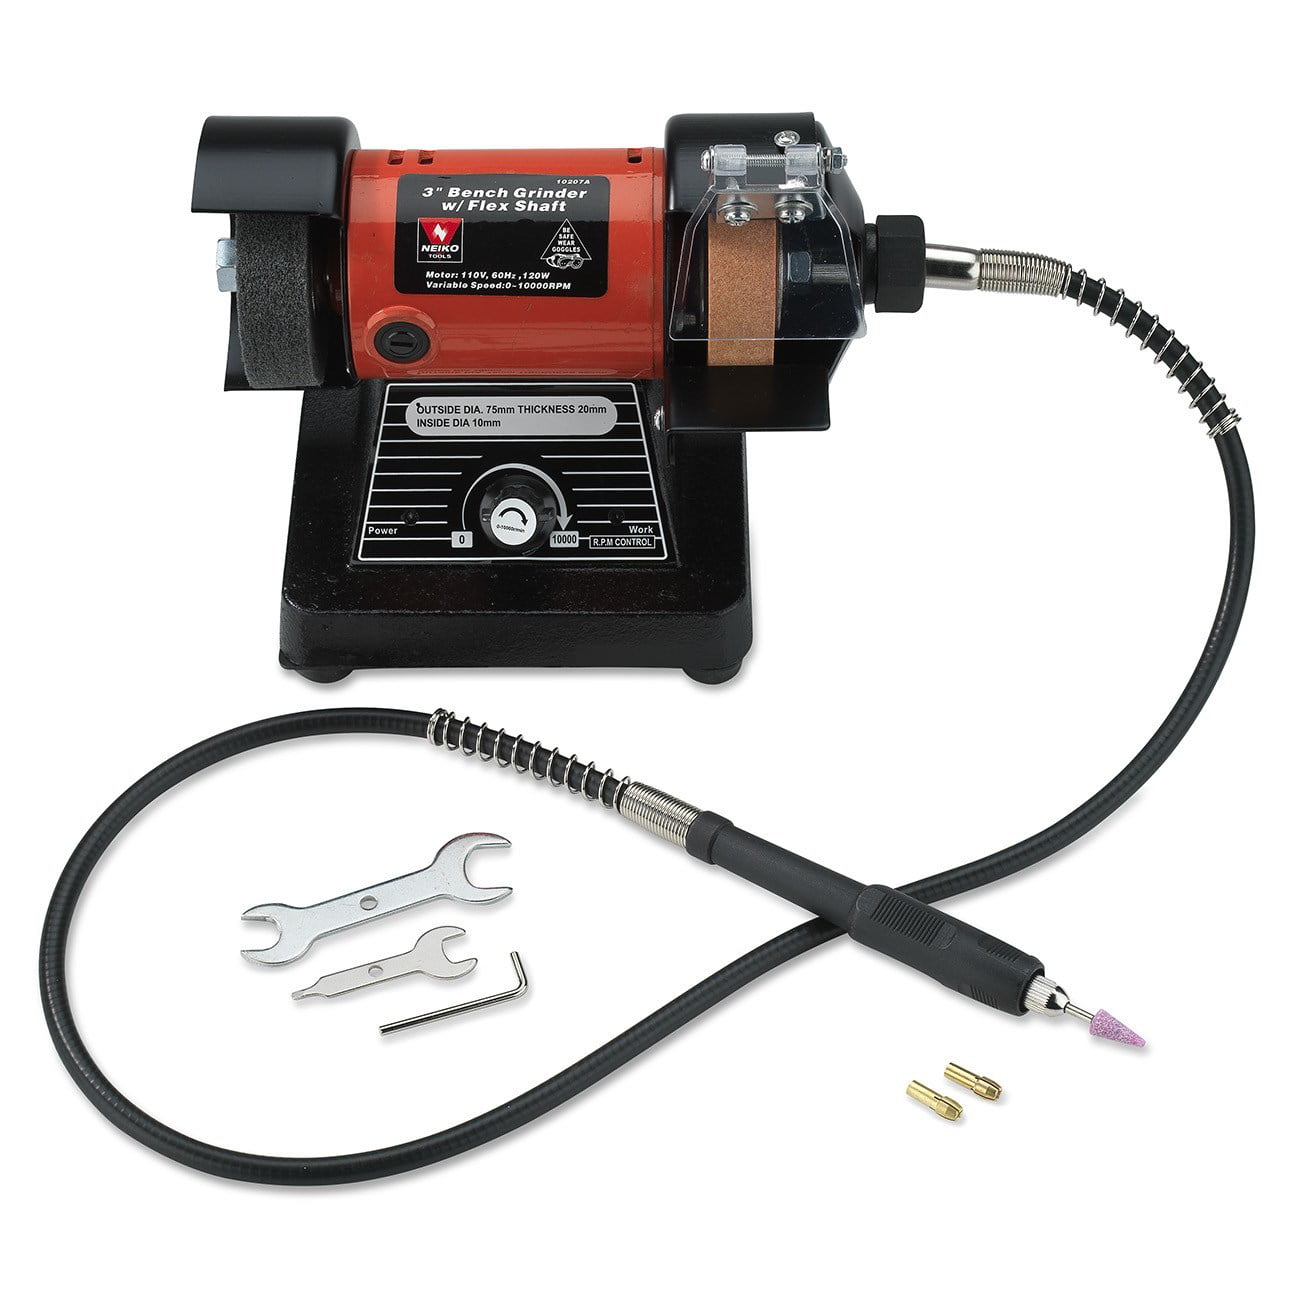 Neiko Tools 3-Inch Bench Grinder with Flex Shaft, 10207A